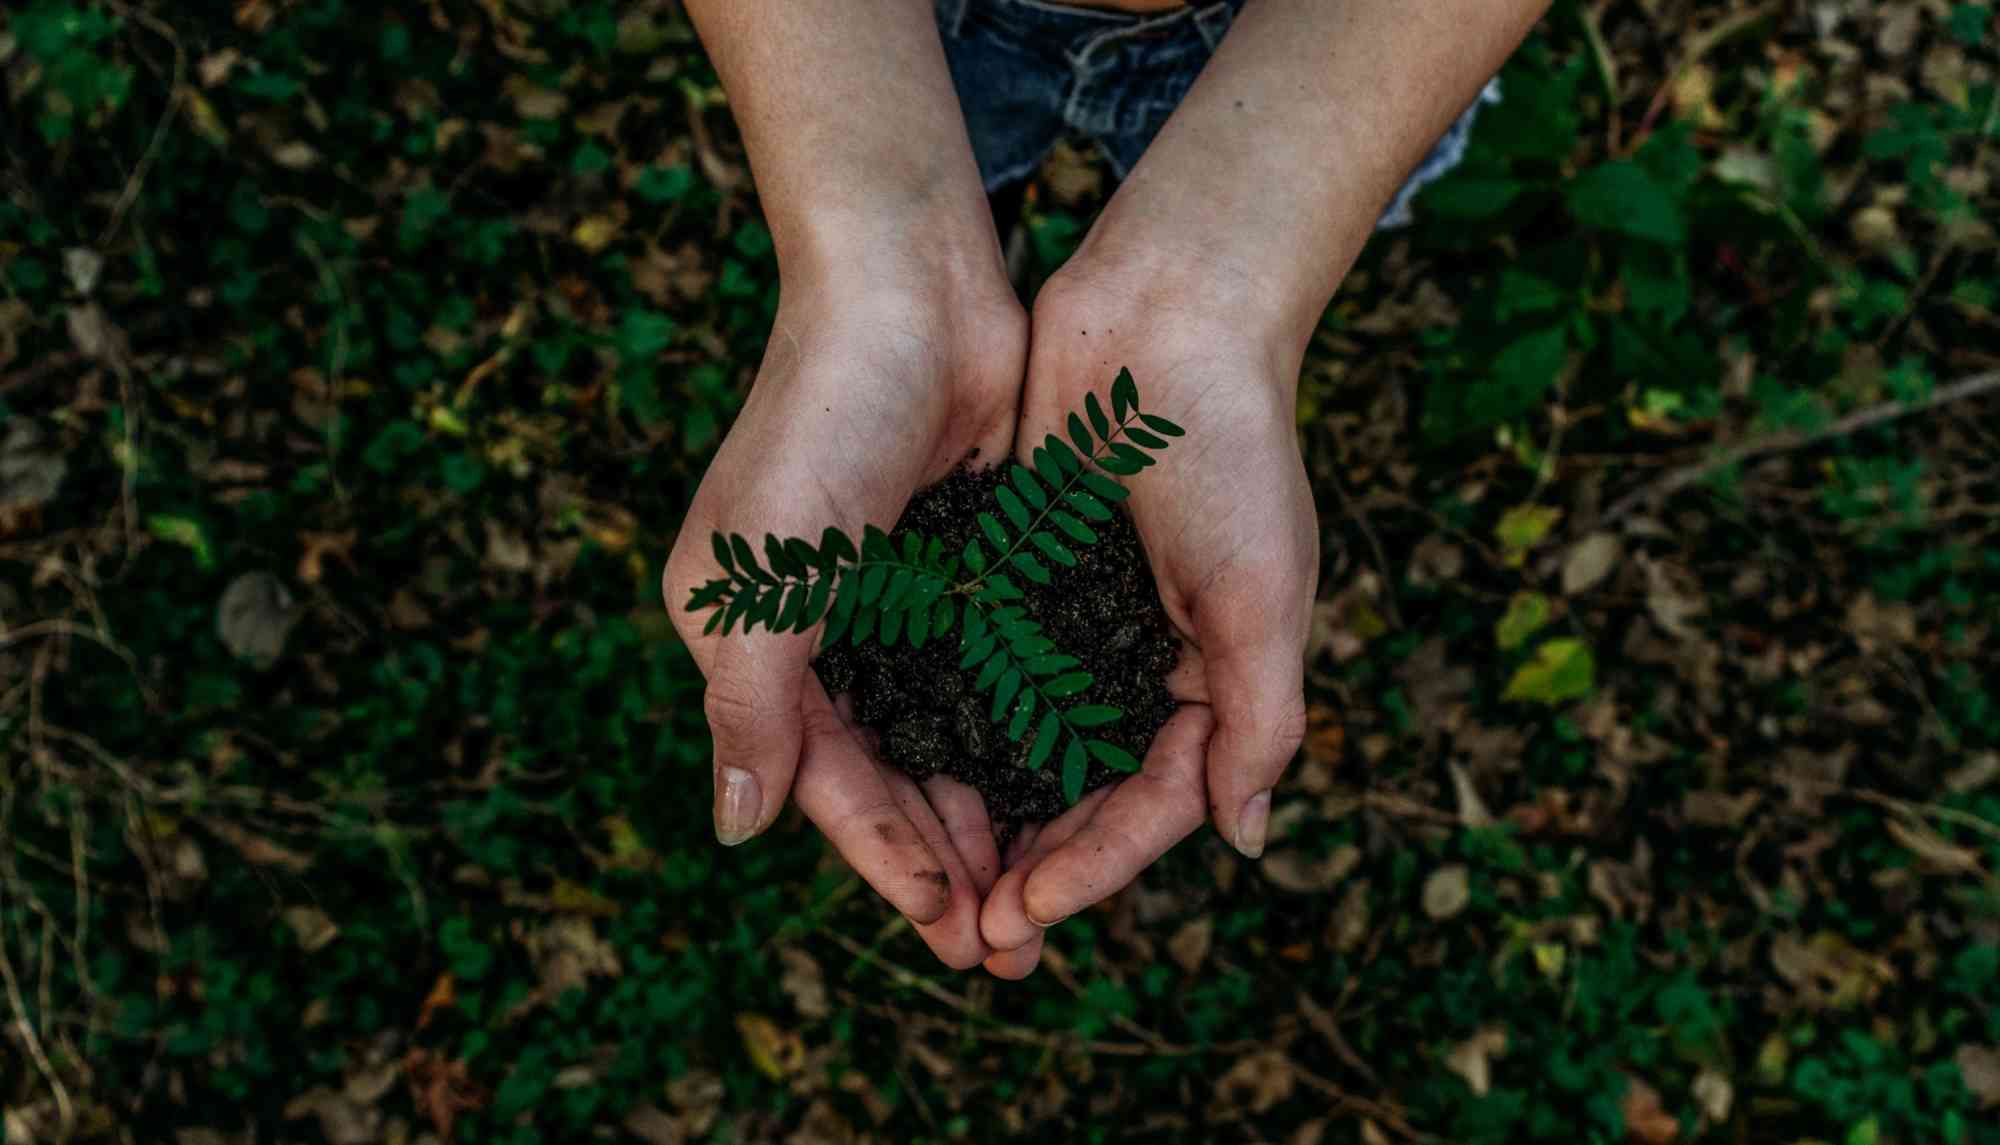 Aerial Photo of Hands Holding a Small Fern in Dirt